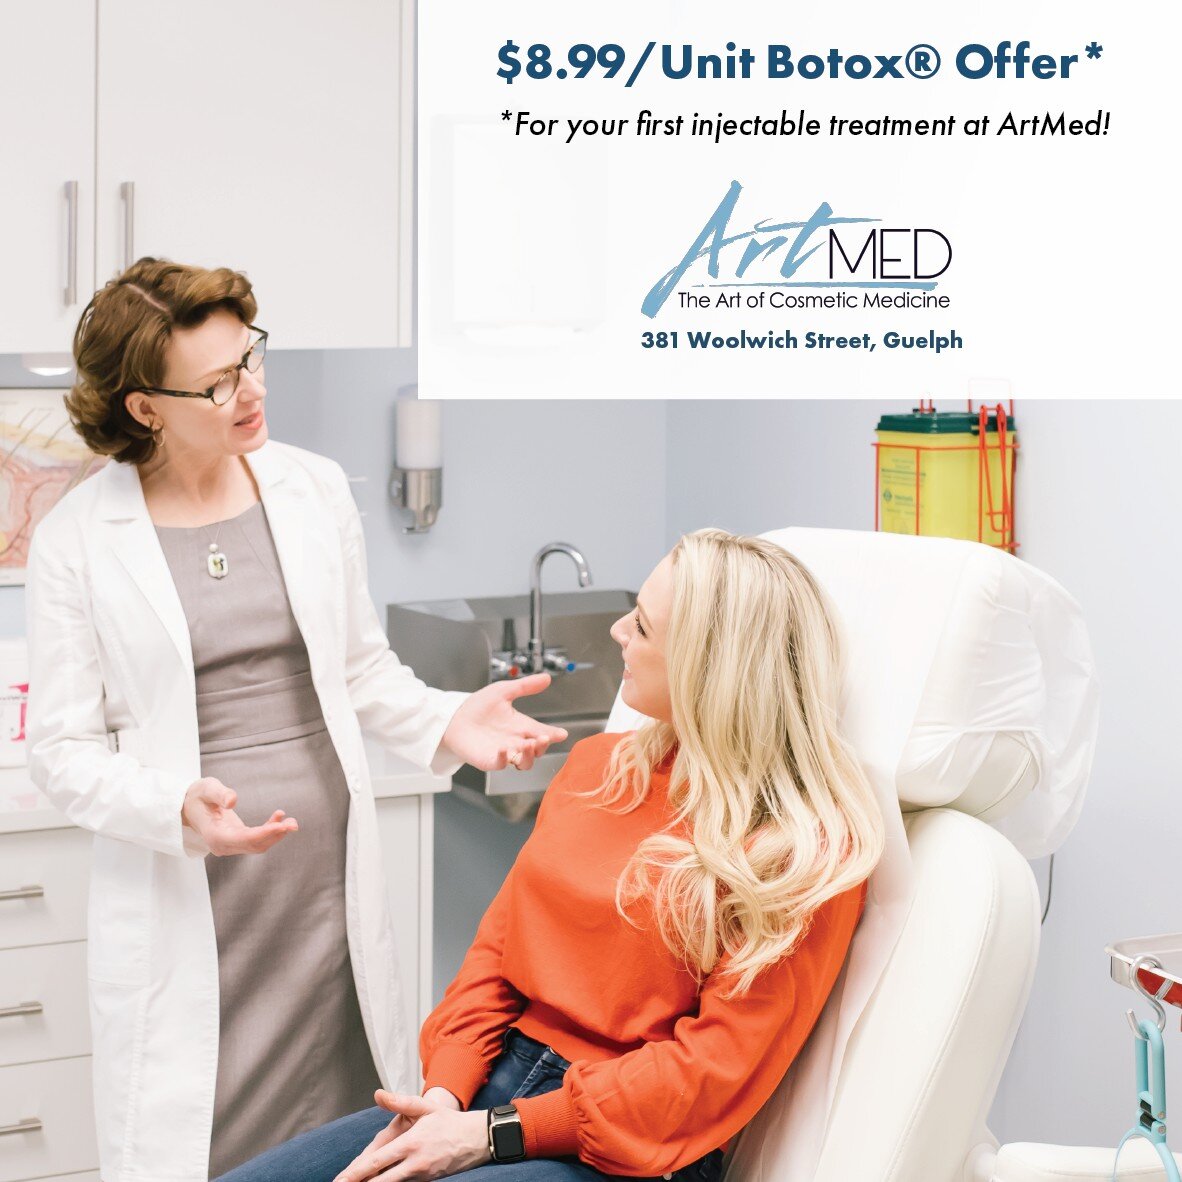 $8.99/Unit of Botox or Xeomin*

*For your first treatment at ArtMed! 

Have you been thinking about trying Botox? This sale is for you!

This offer is only for those who have never had an injectable treatment at our clinic. Only available to book unt